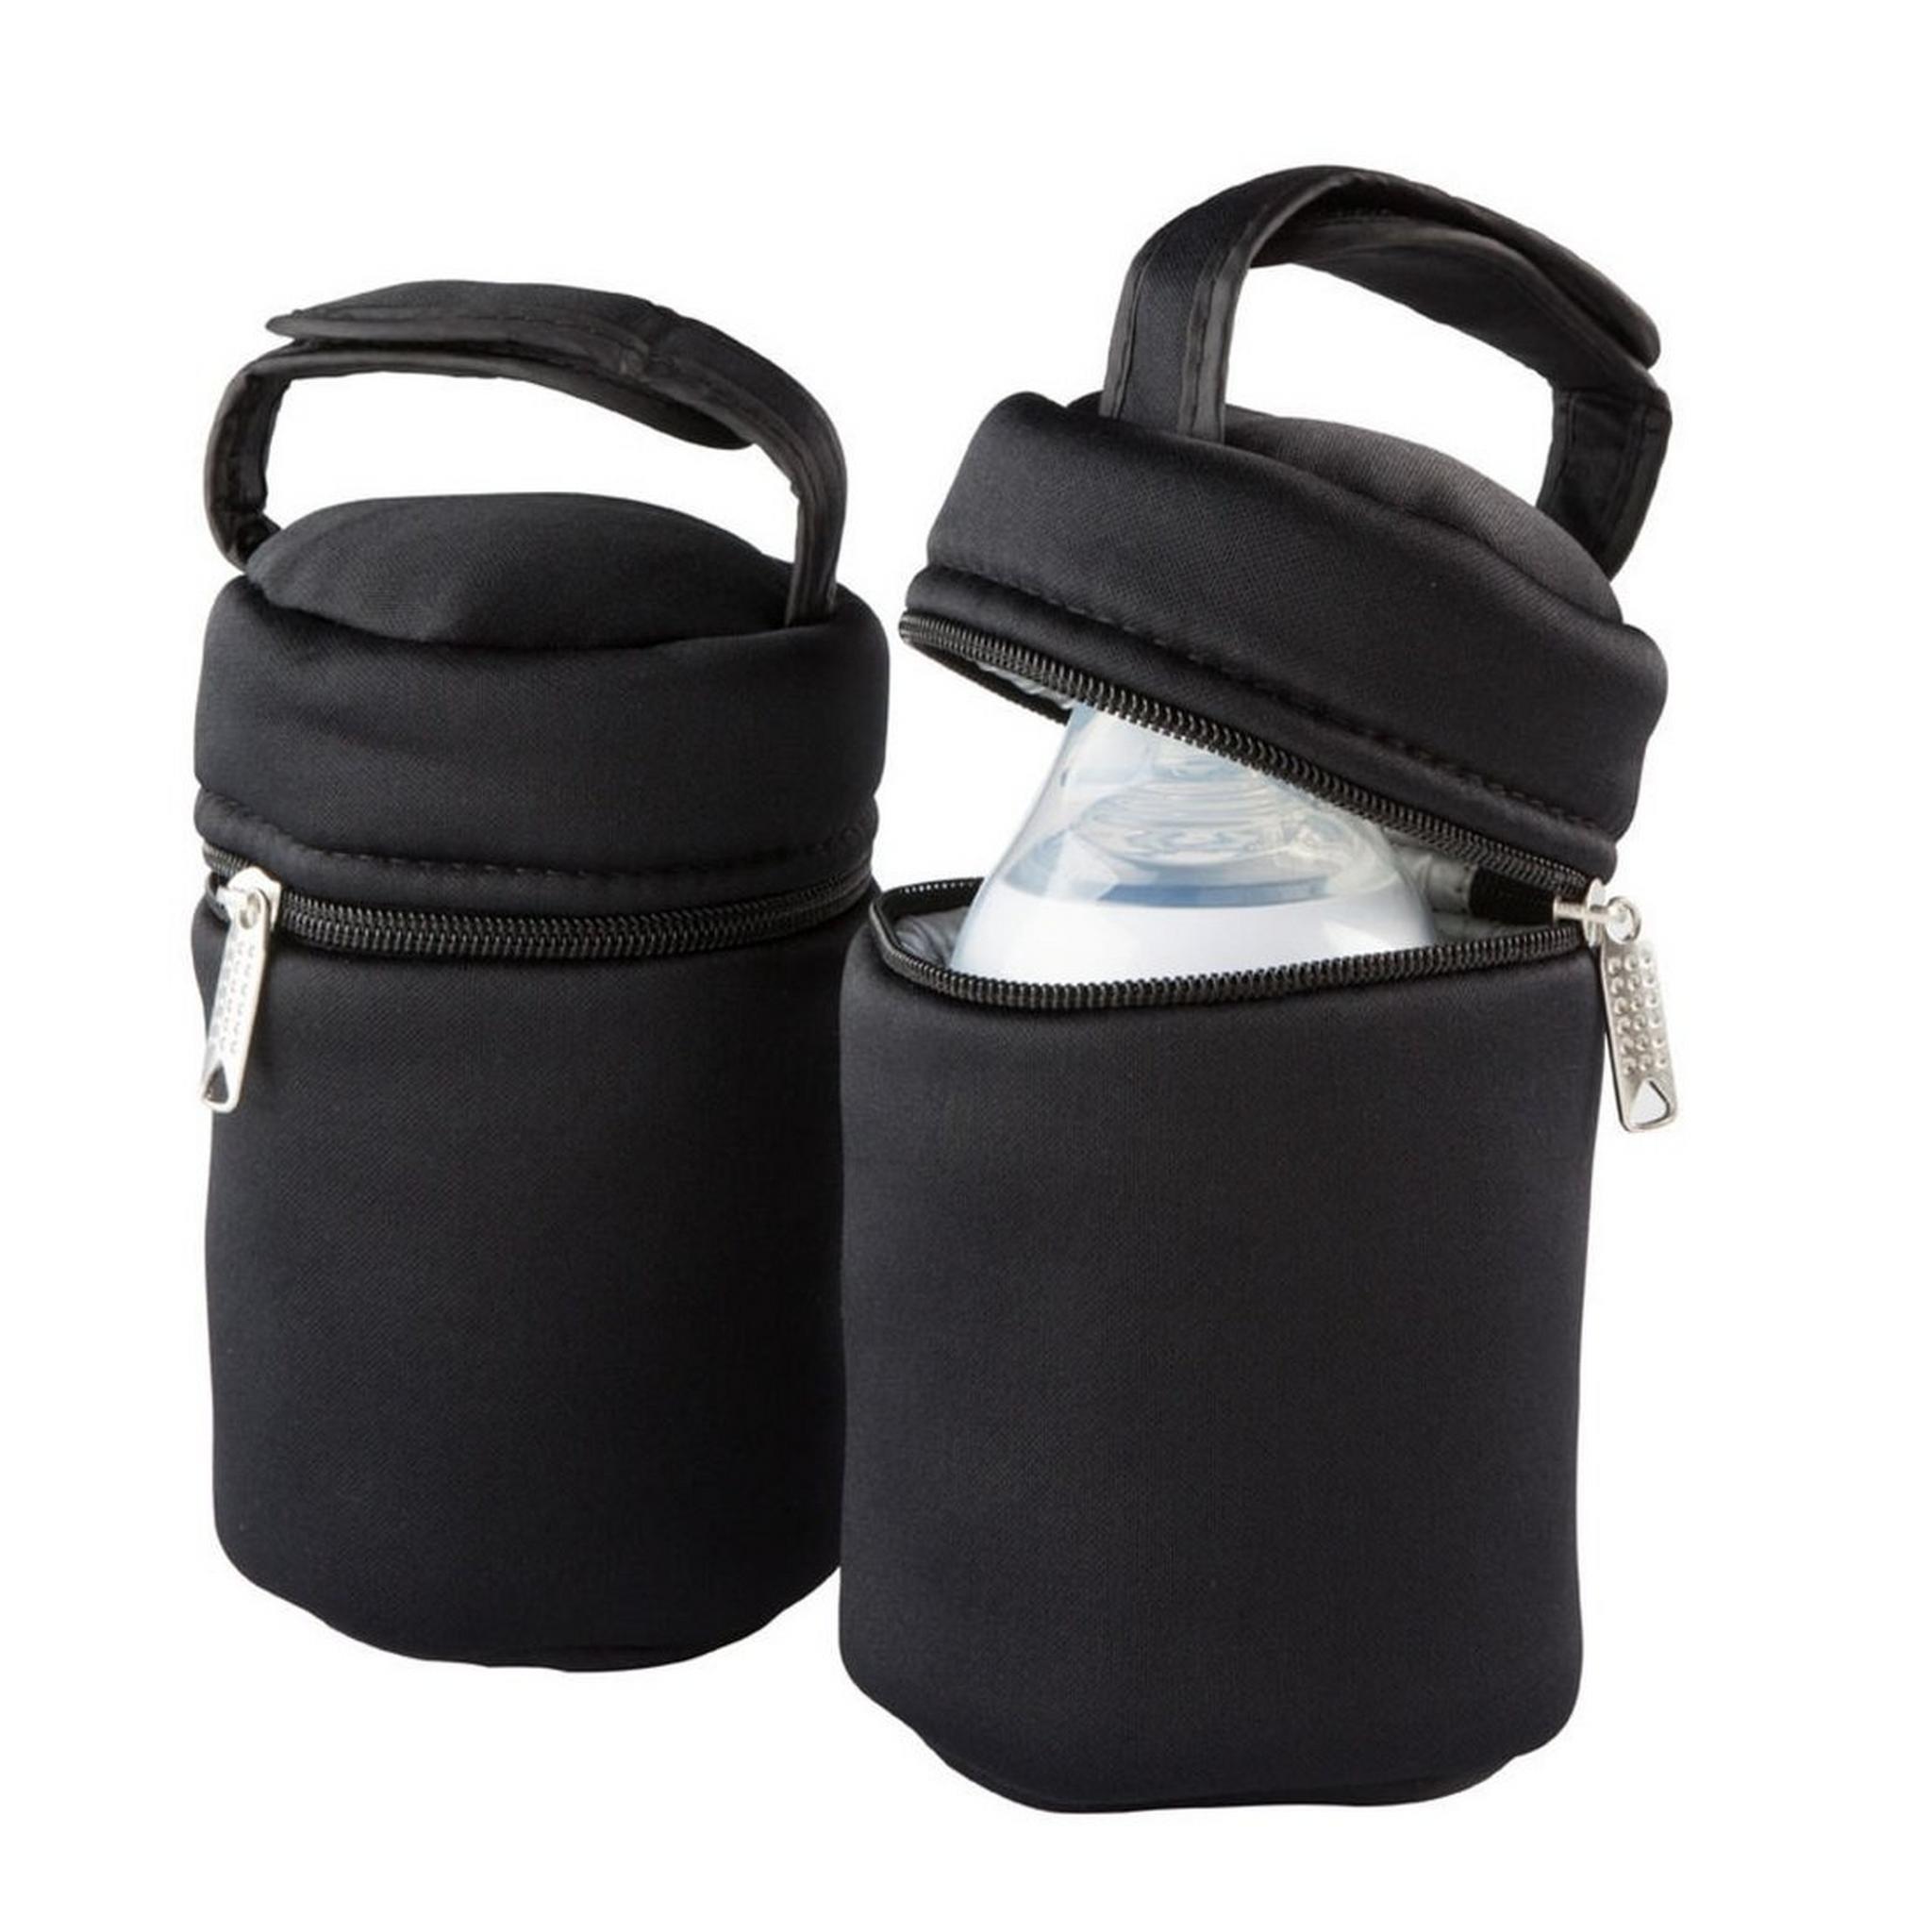 Tommee Tippee Closer To Insulated Bottle Carriers Twin Pack - TT43129371